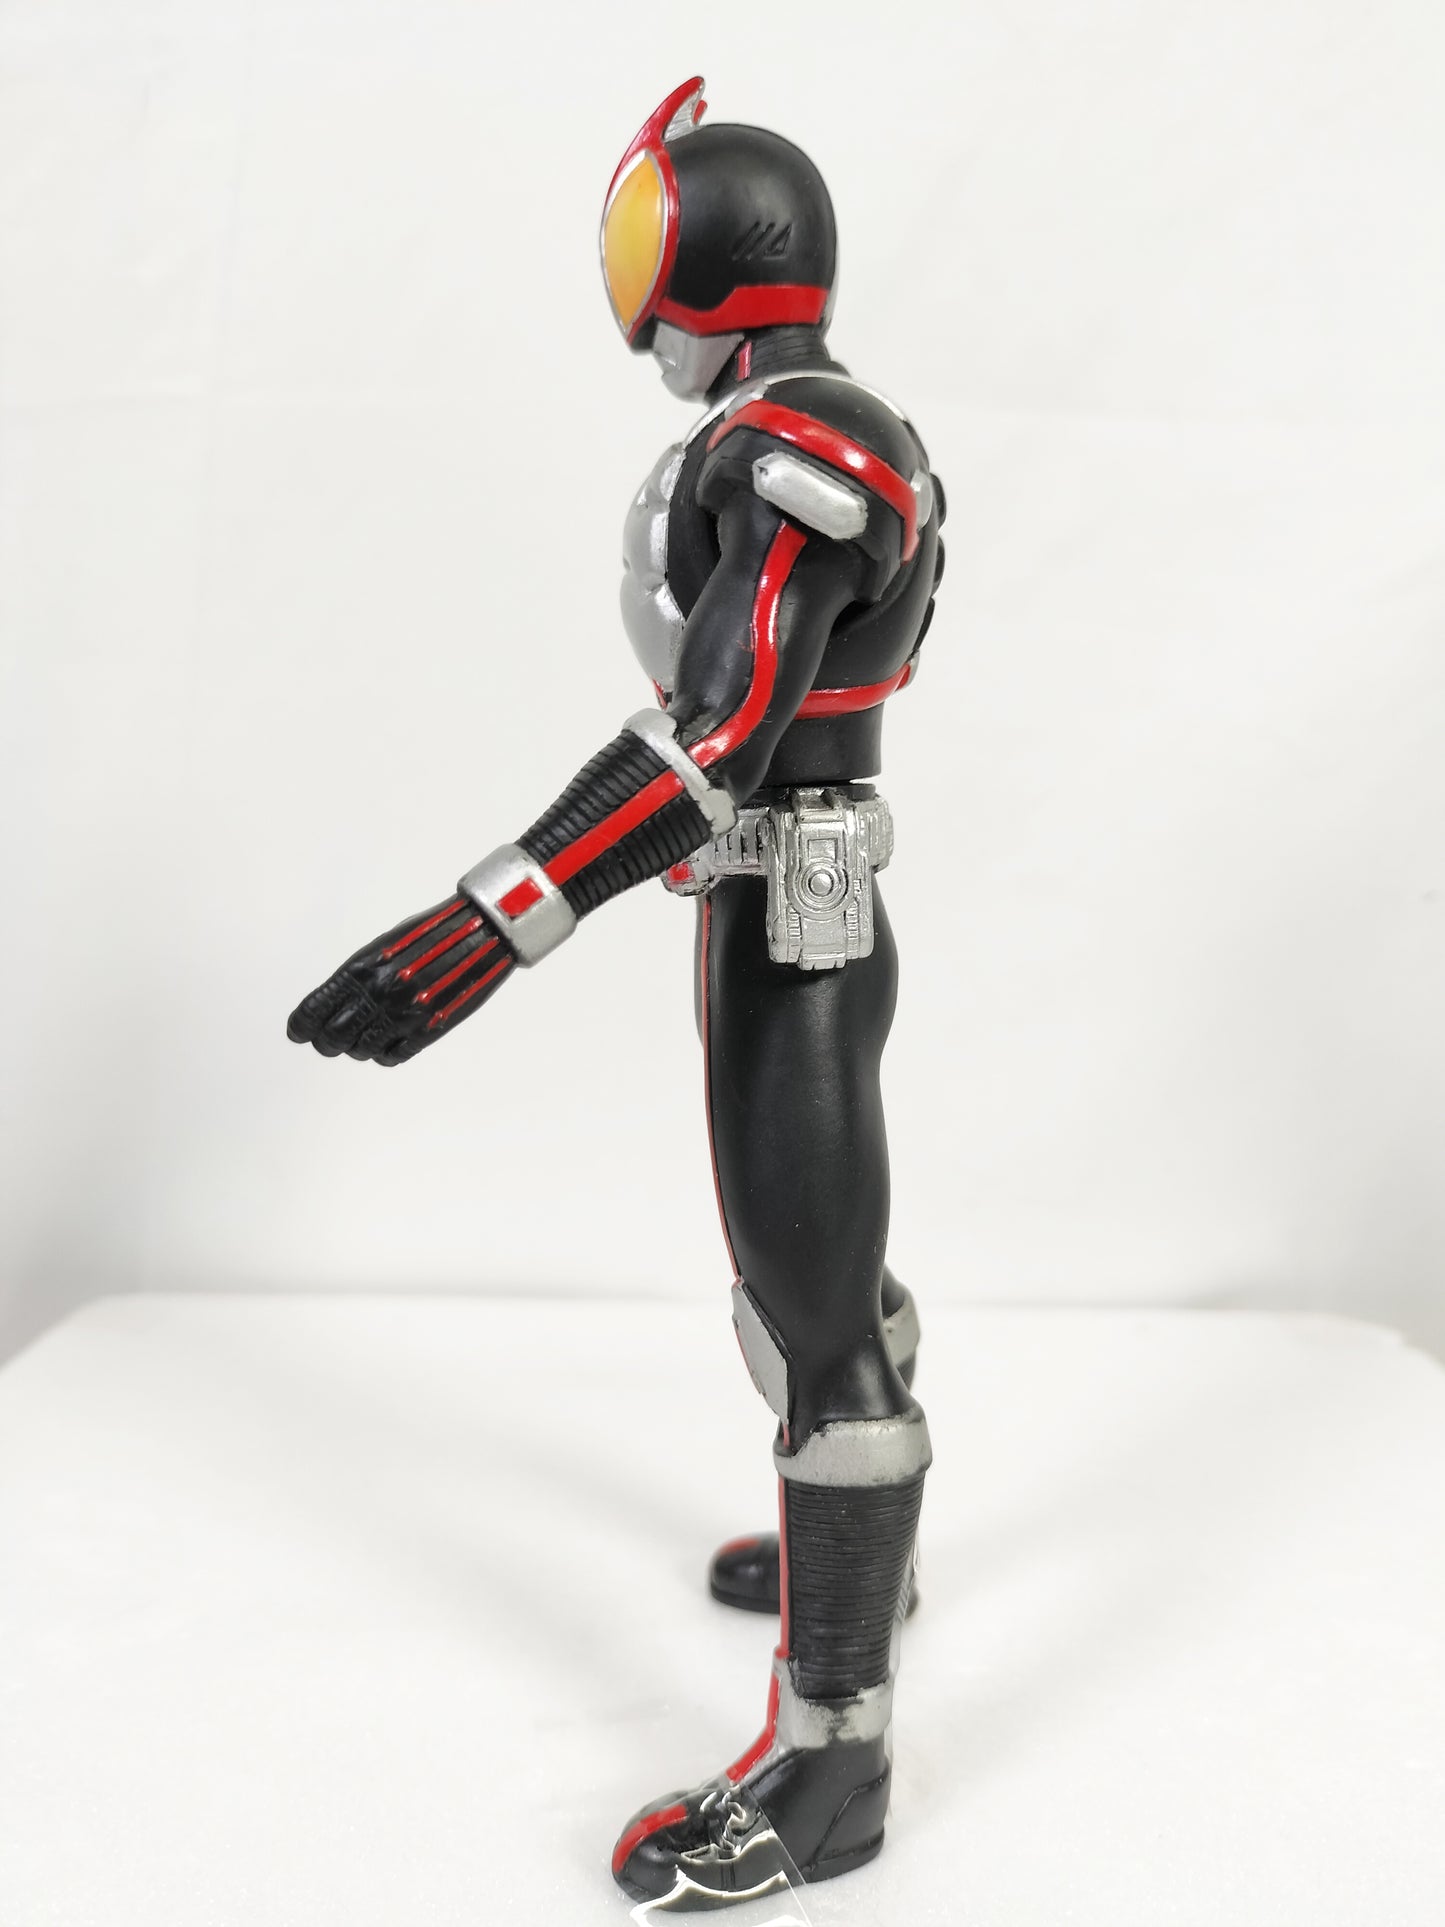 Kamen Rider 555 Mask Rider 555 Made in China Height about 17.5cm Manufactured in 2002 Sofvi Figure retro vintage major scratches and dirt